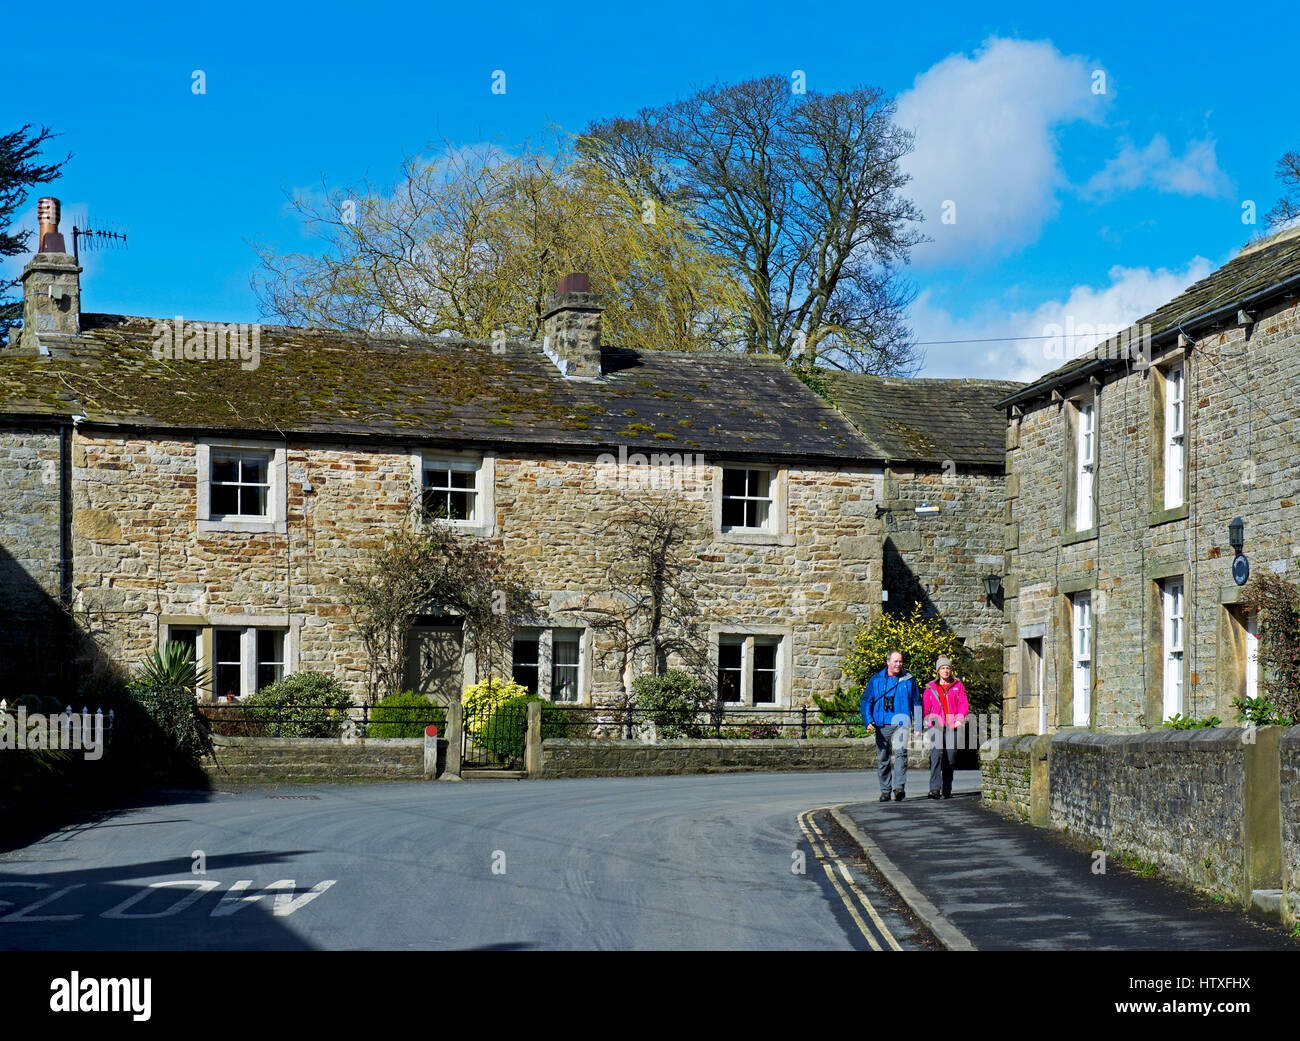 Couple walking in Burnsall, Wharfedale, Yorkshire Dales National Park, North Yorkshire, England UK Stock Photo